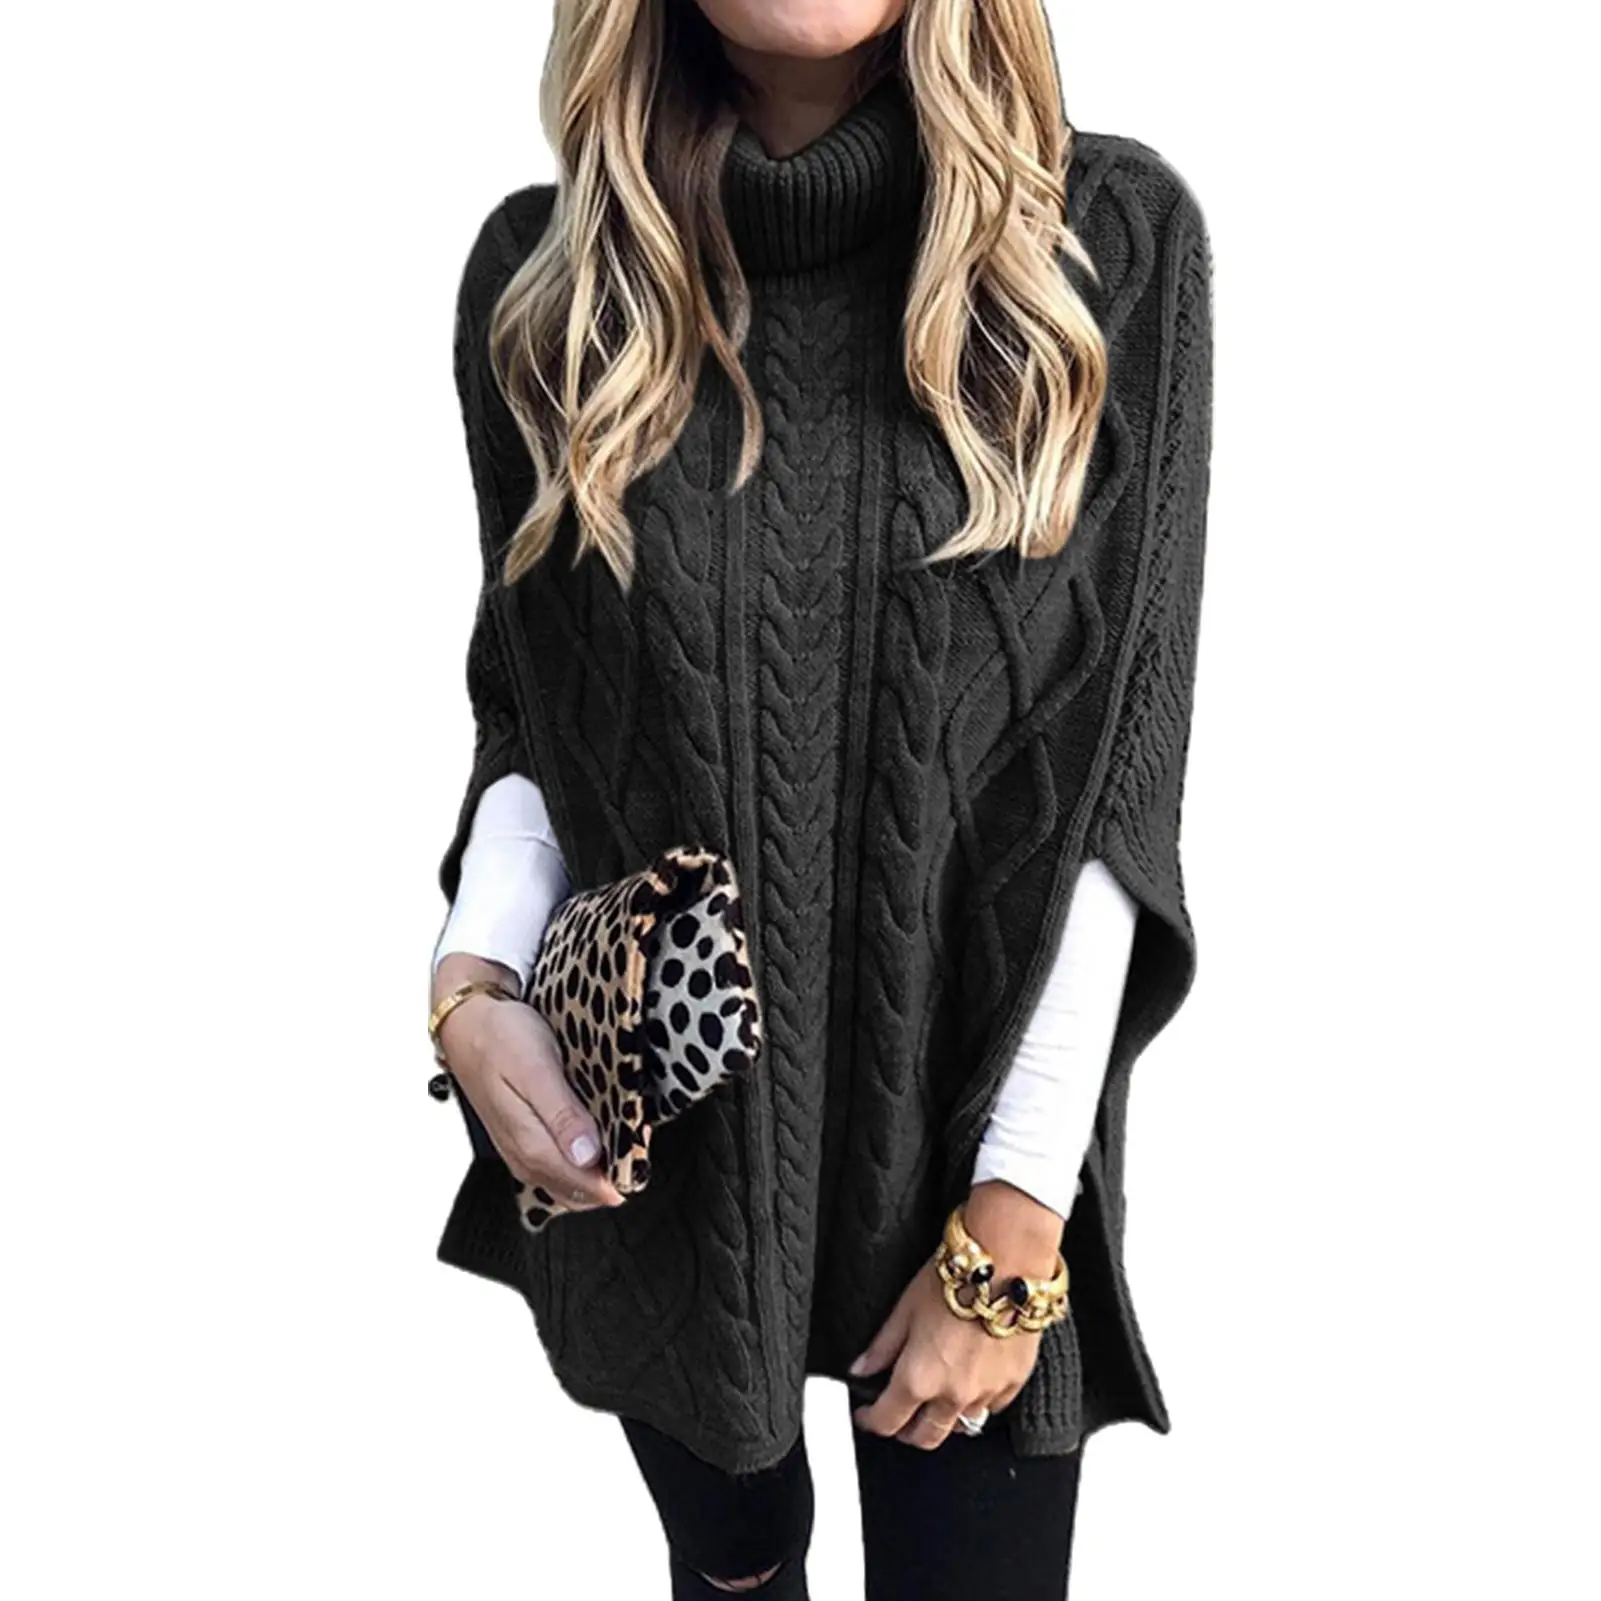 

Autumn Winter Sweater Women Casual Solid Color Turtle Neck Twist Braid Shawl Knitted Sweater Oversize Pullover